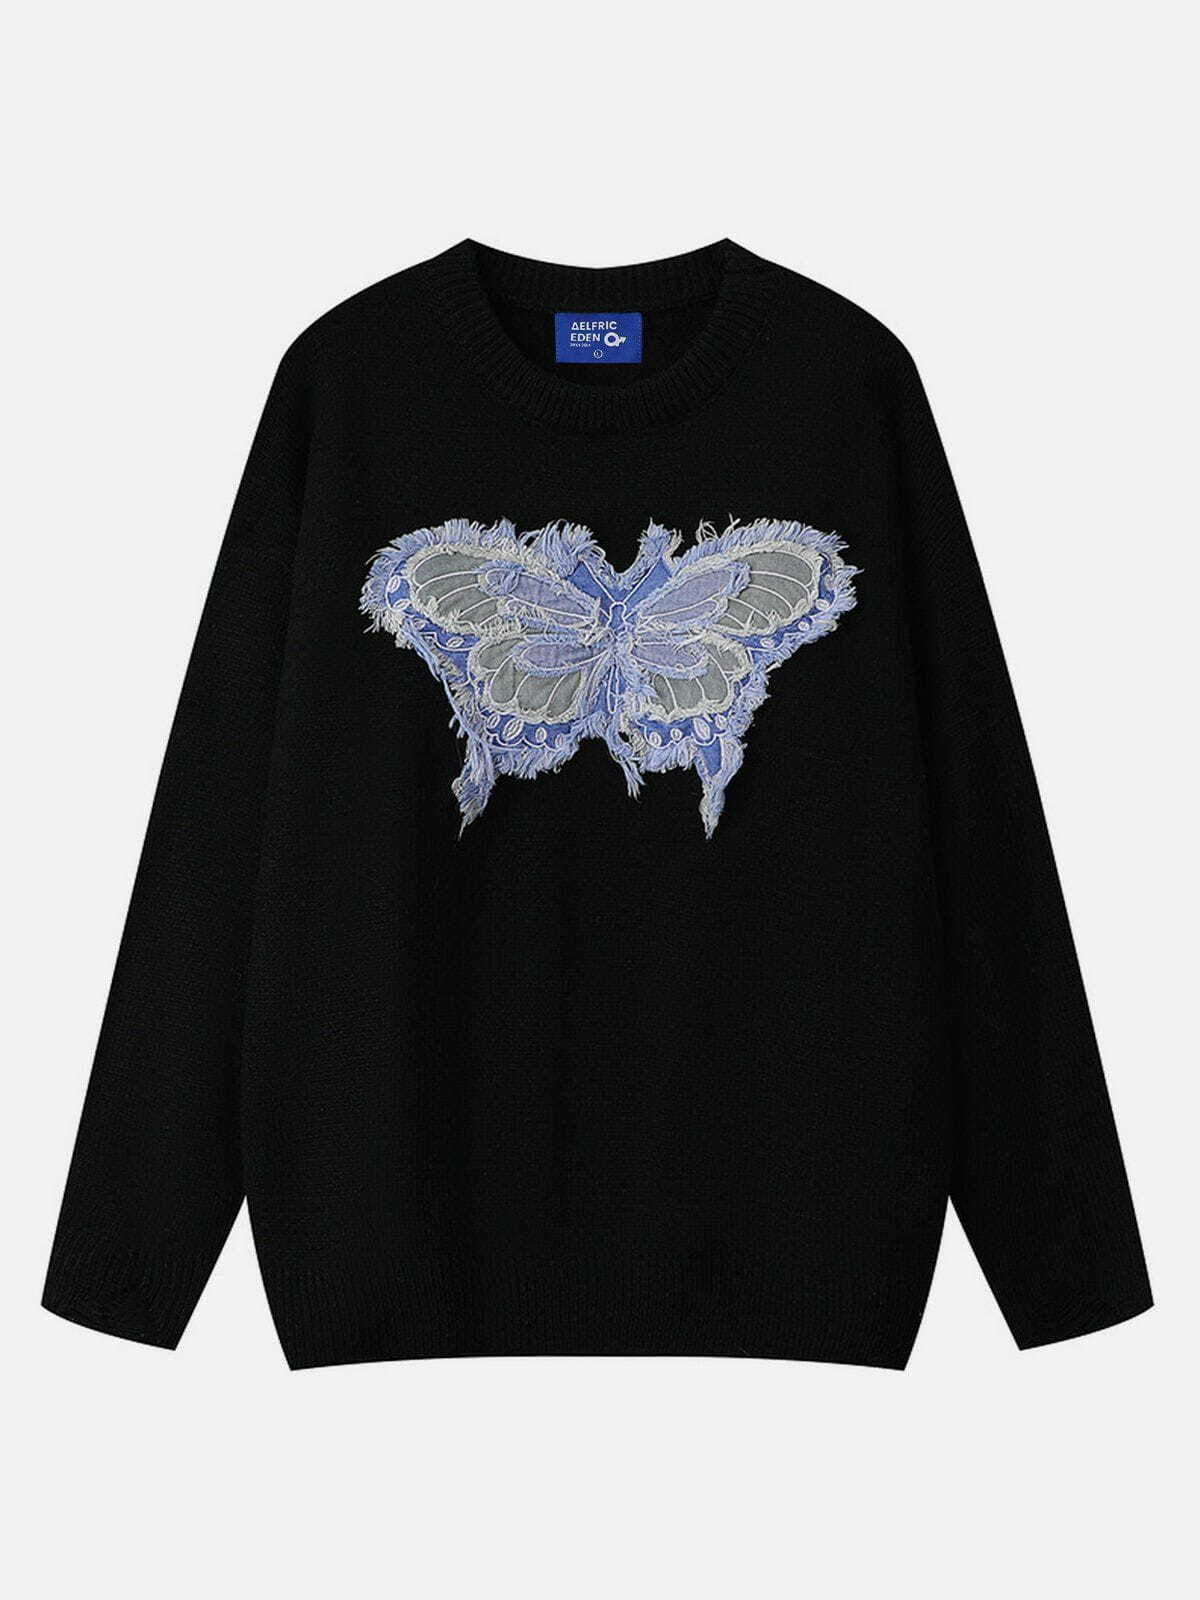 chic butterfly applique sweater   youthful urban style 3313